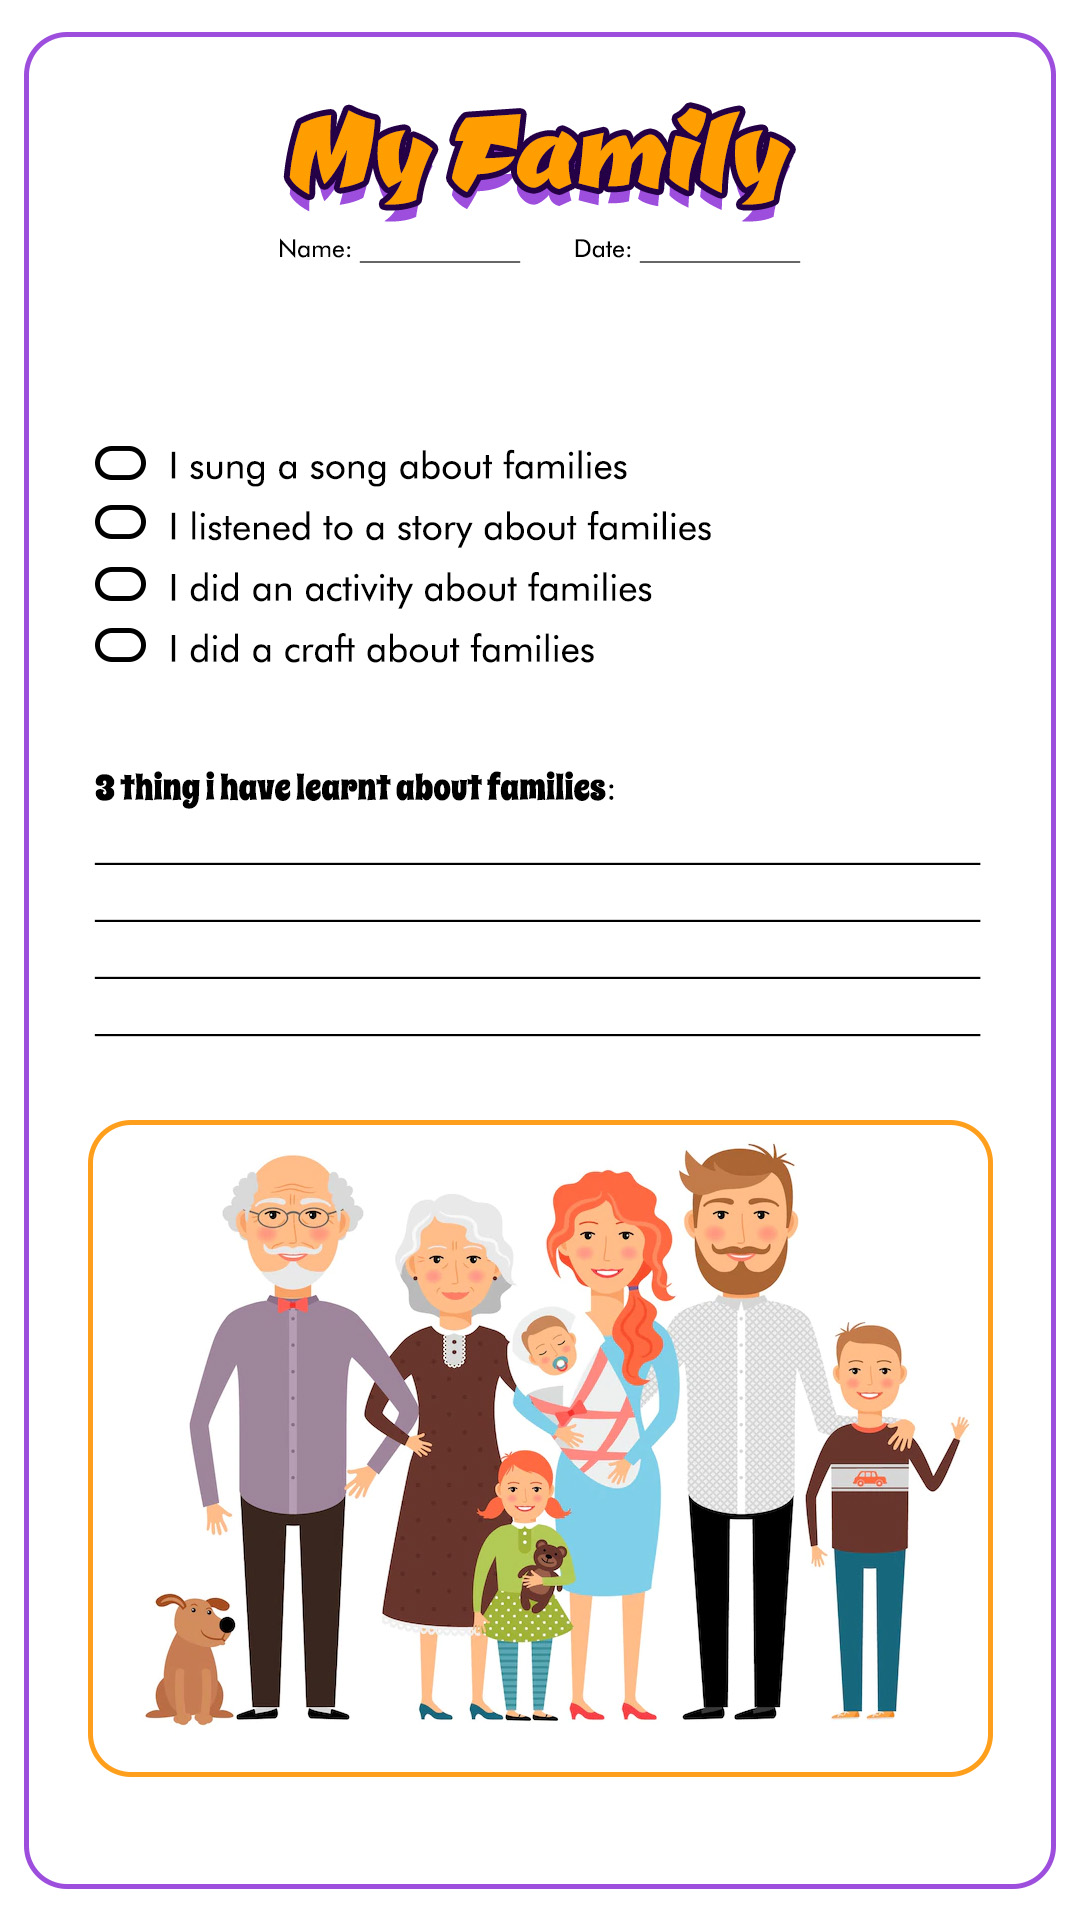 About My Family Worksheet Image